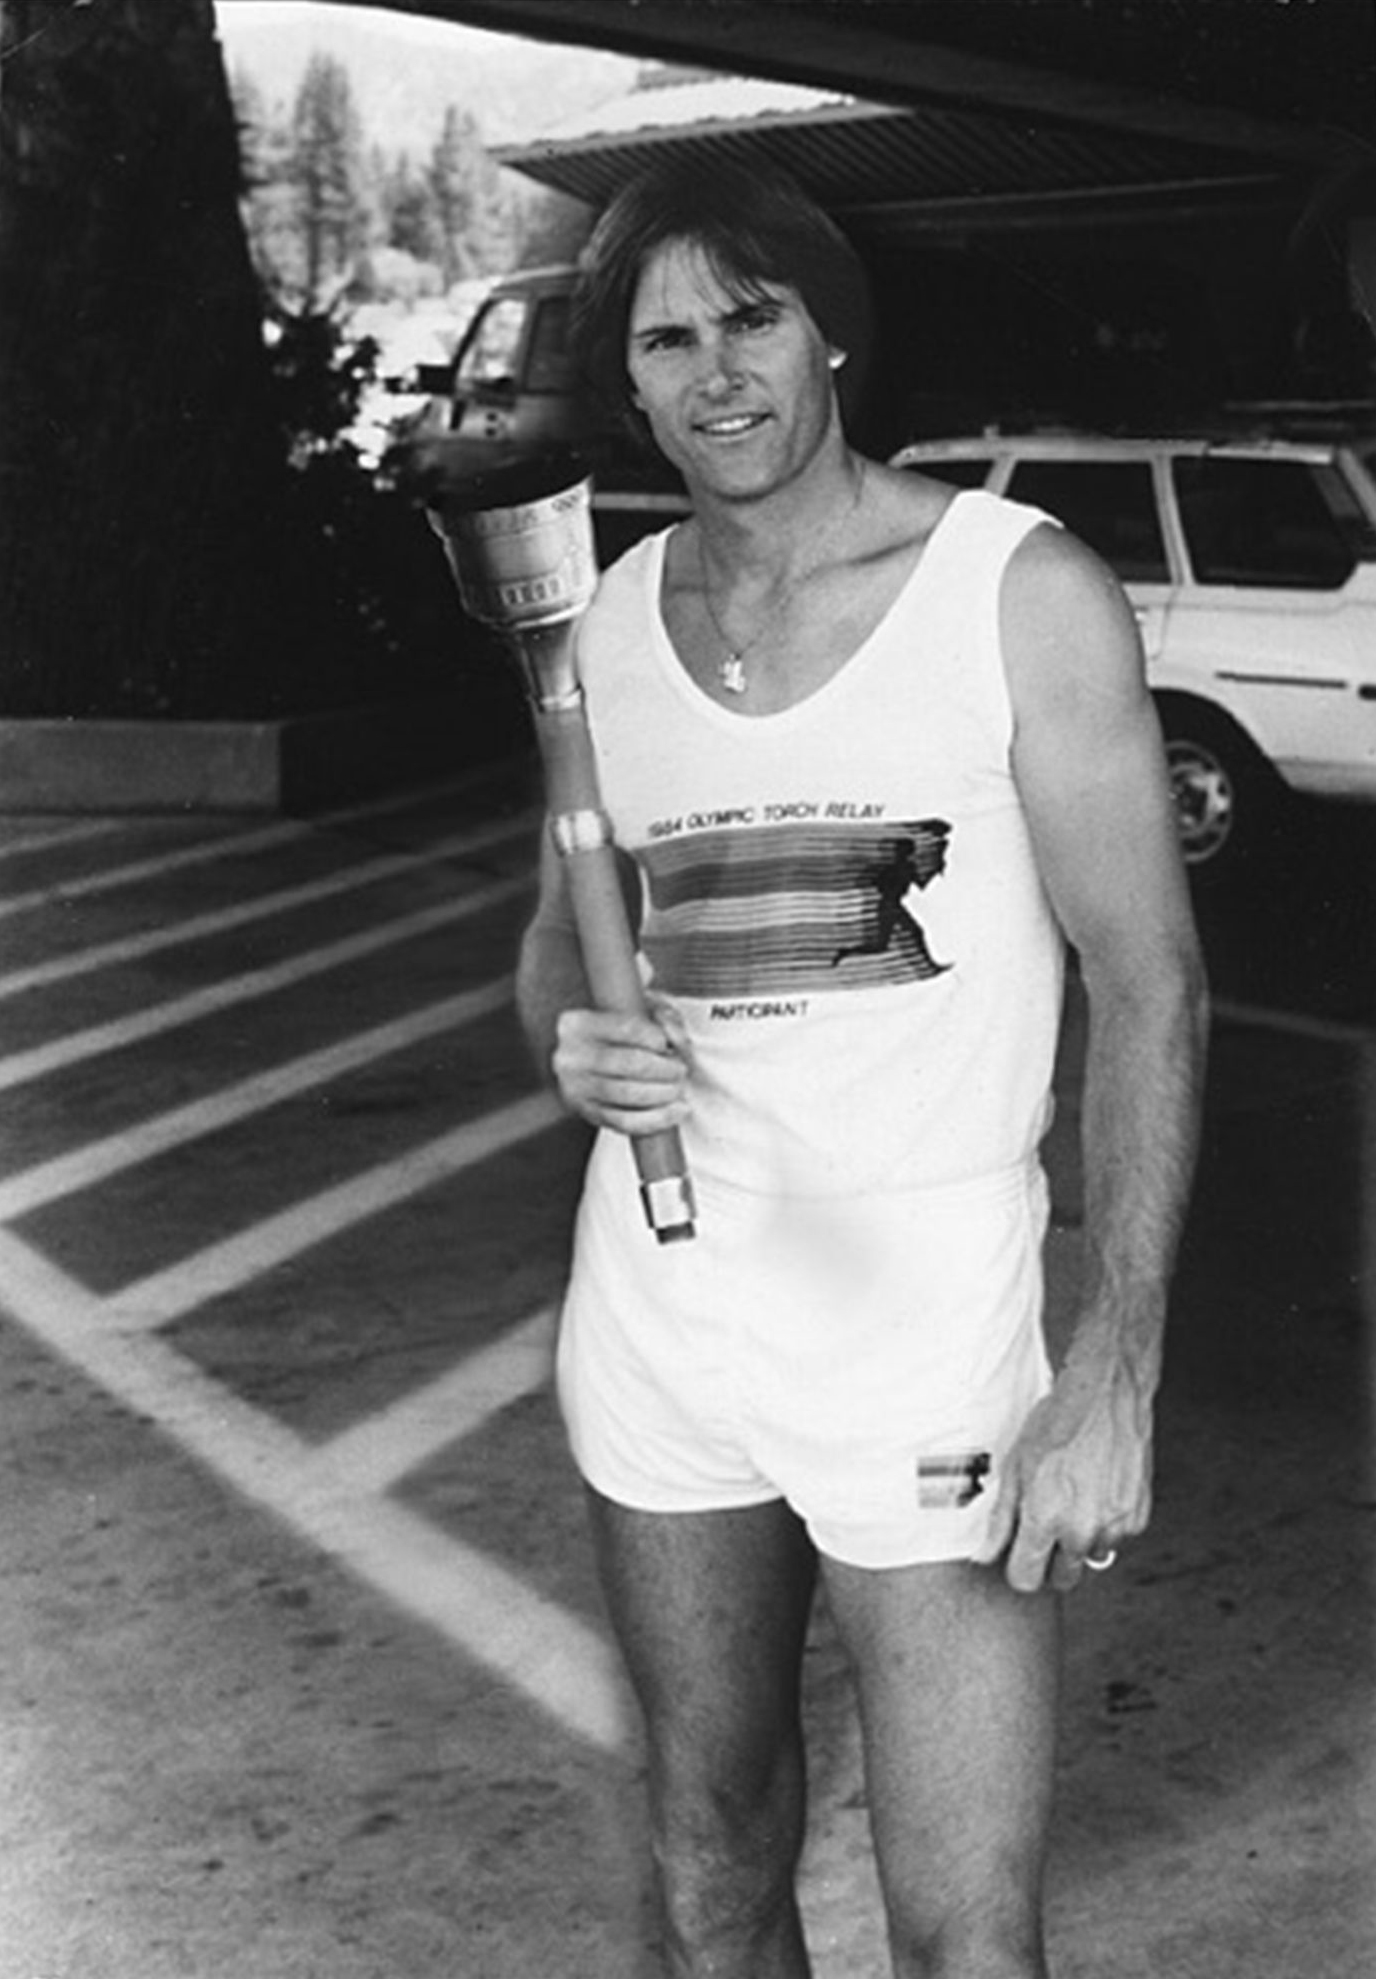 American Decathlete, Bruce Jenner poses with the 1984 Olympic Torch he carried through Lake Tahoe, Nevada.